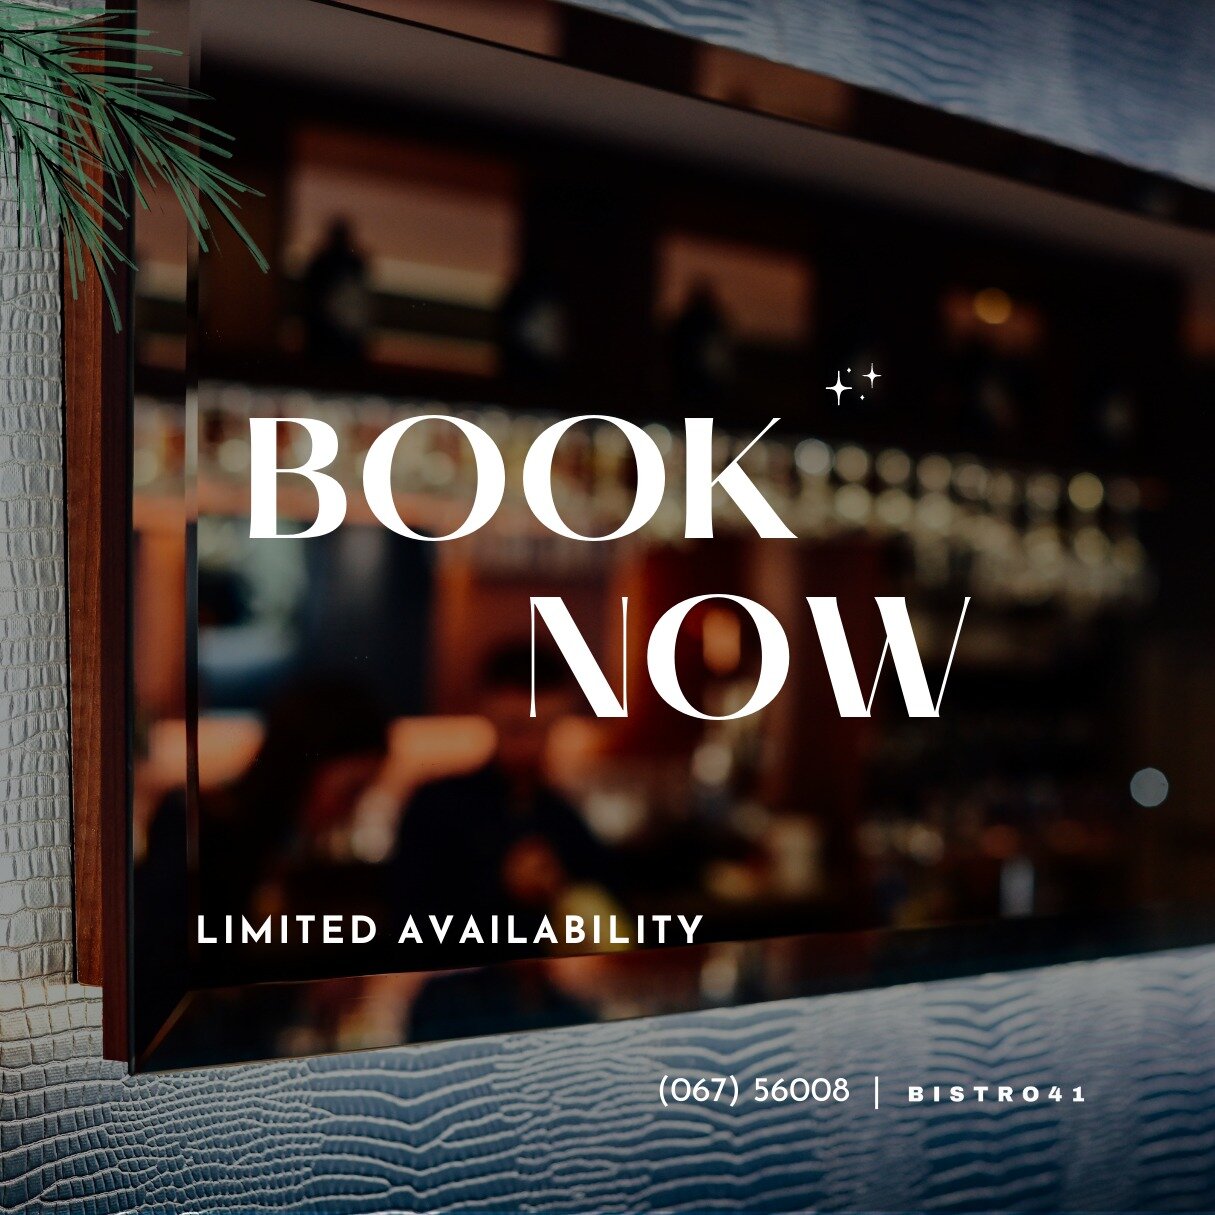 ✨ Limited availability ✨

Be sure to book your table for this December, we have limited tables left!

Book now over the phone 📞 or email us 🗓

(067) 56008
bistro41nenagh@gmail.com

#bistro41 #bistro41nenagh #bistro41christmas #christmasnenagh #chri